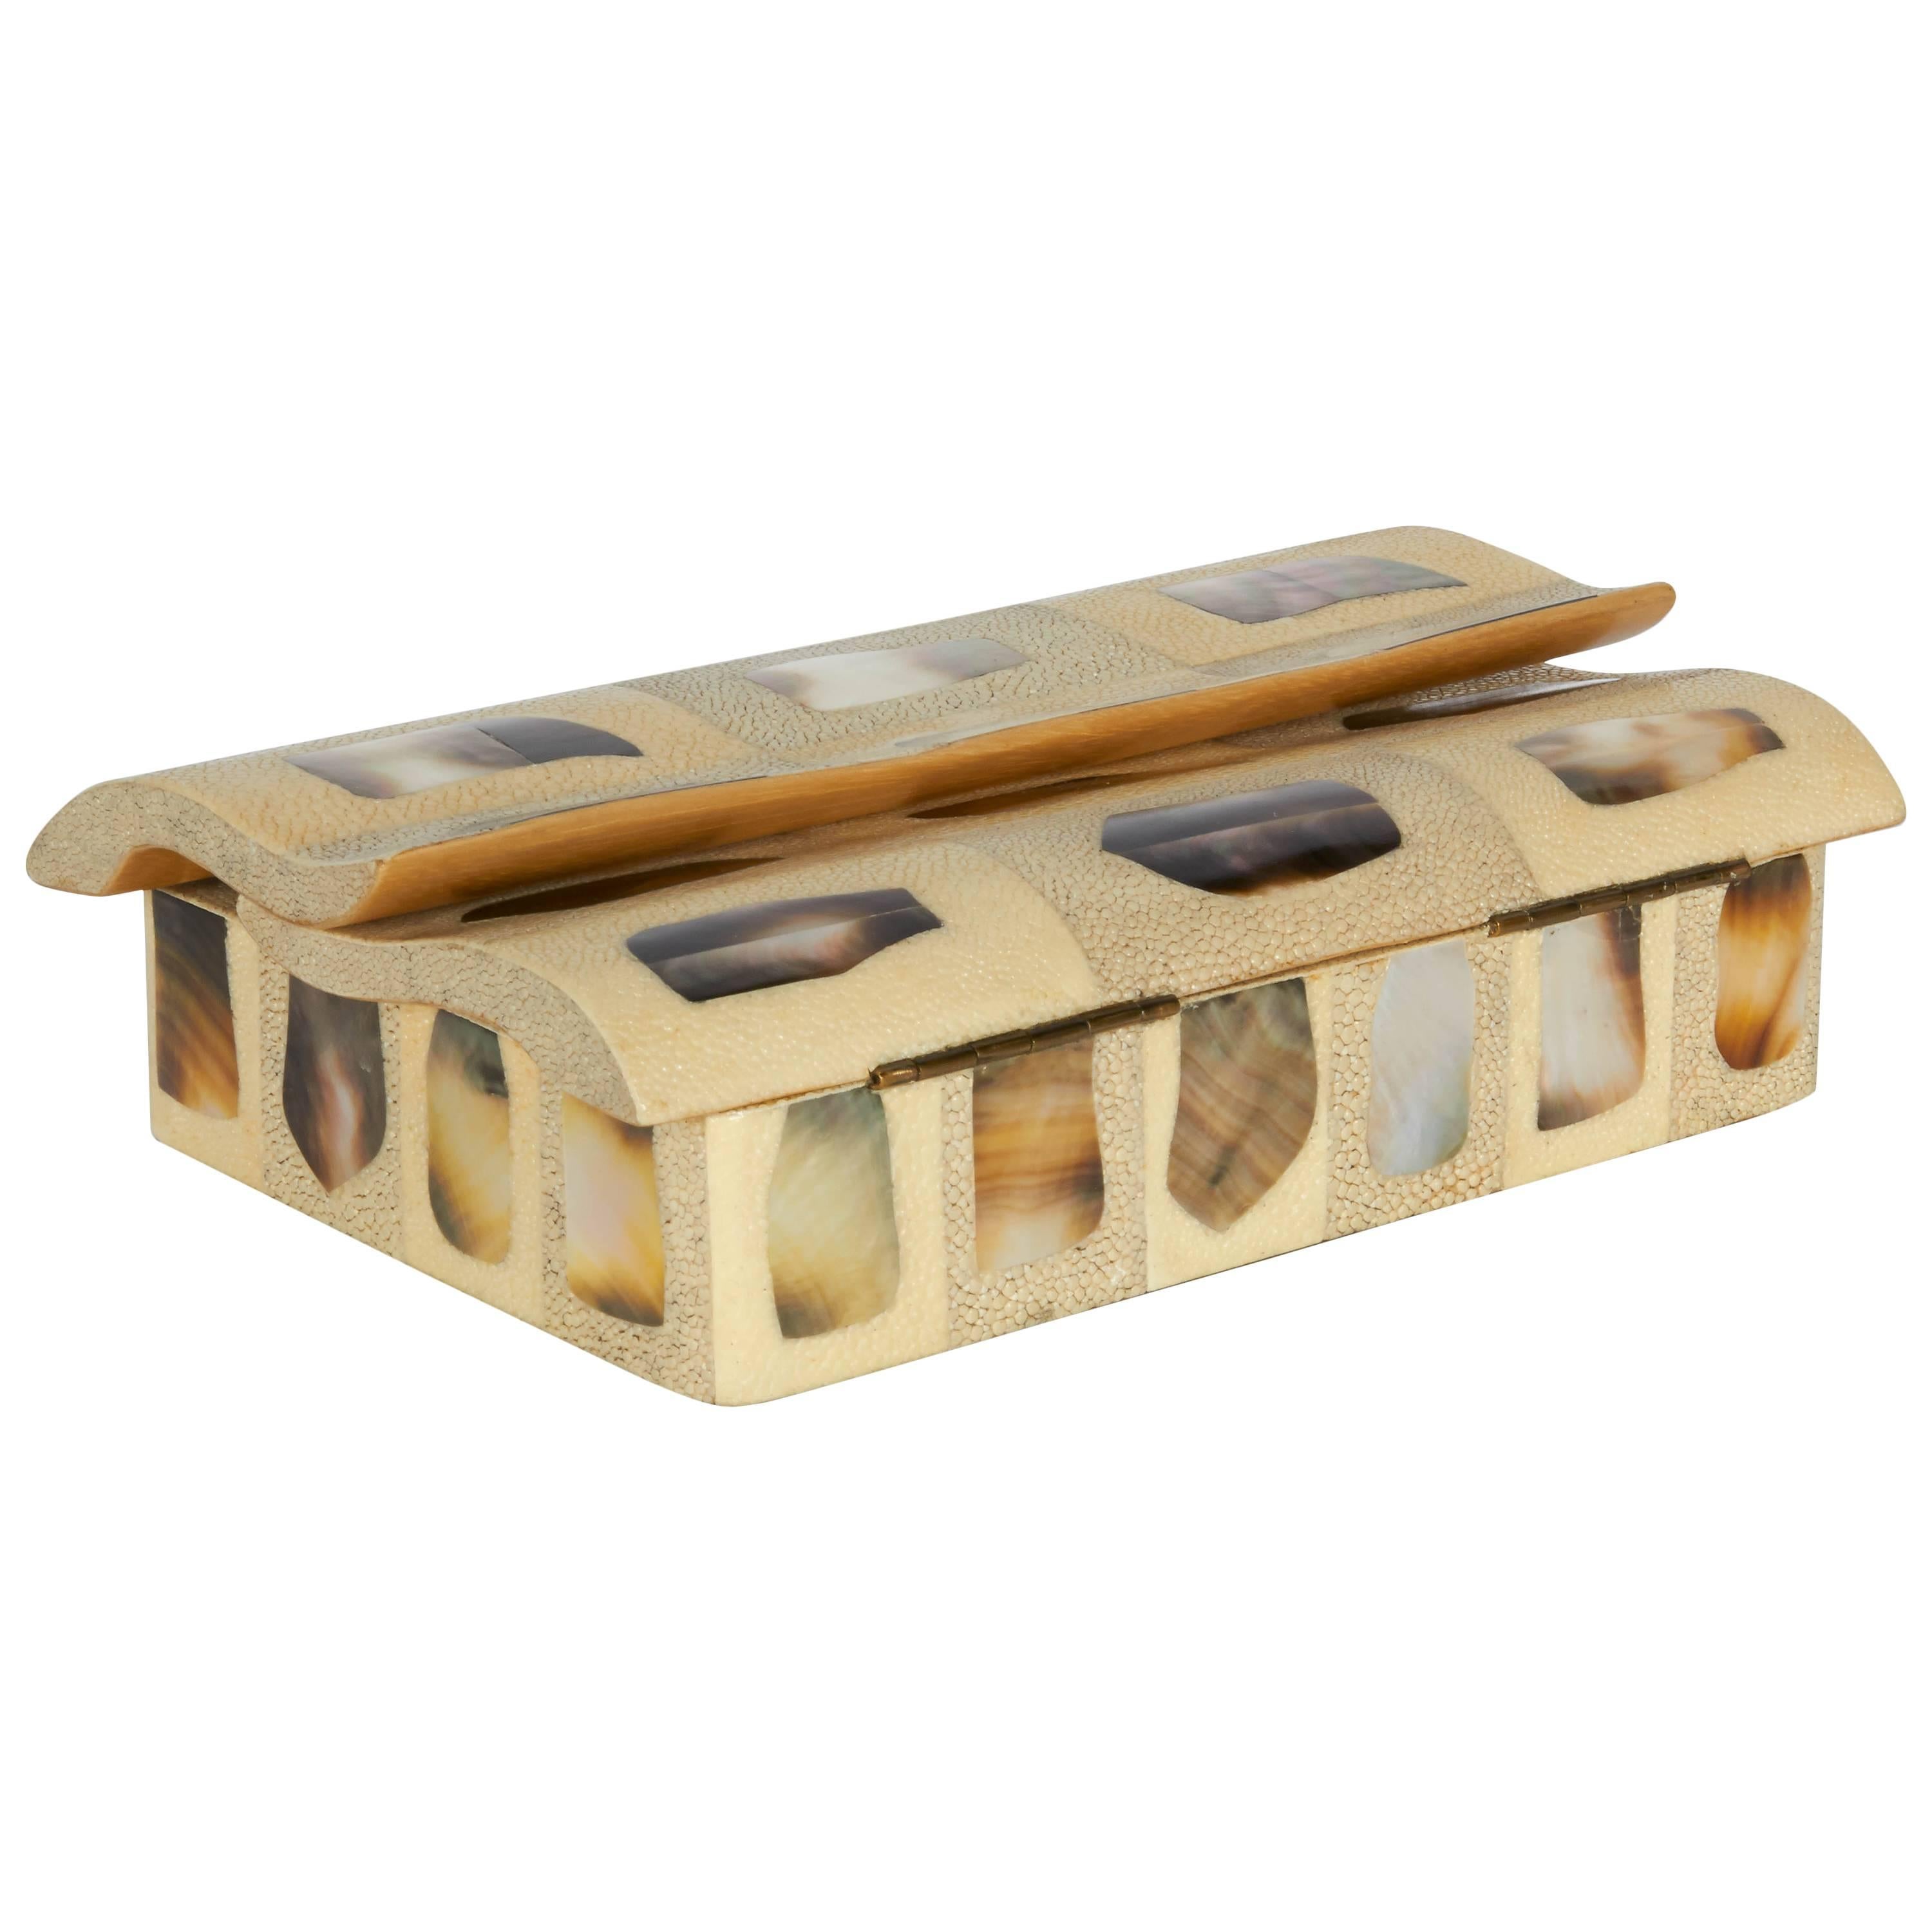 Exquisite decorative box featuring unique double lid top with overlapping wave formation.  Comprised of alternating crème and grey shagreen, creating a geometric pattern, each with exotic mother-of-pearl inlays. Lids open to reveal black velvet